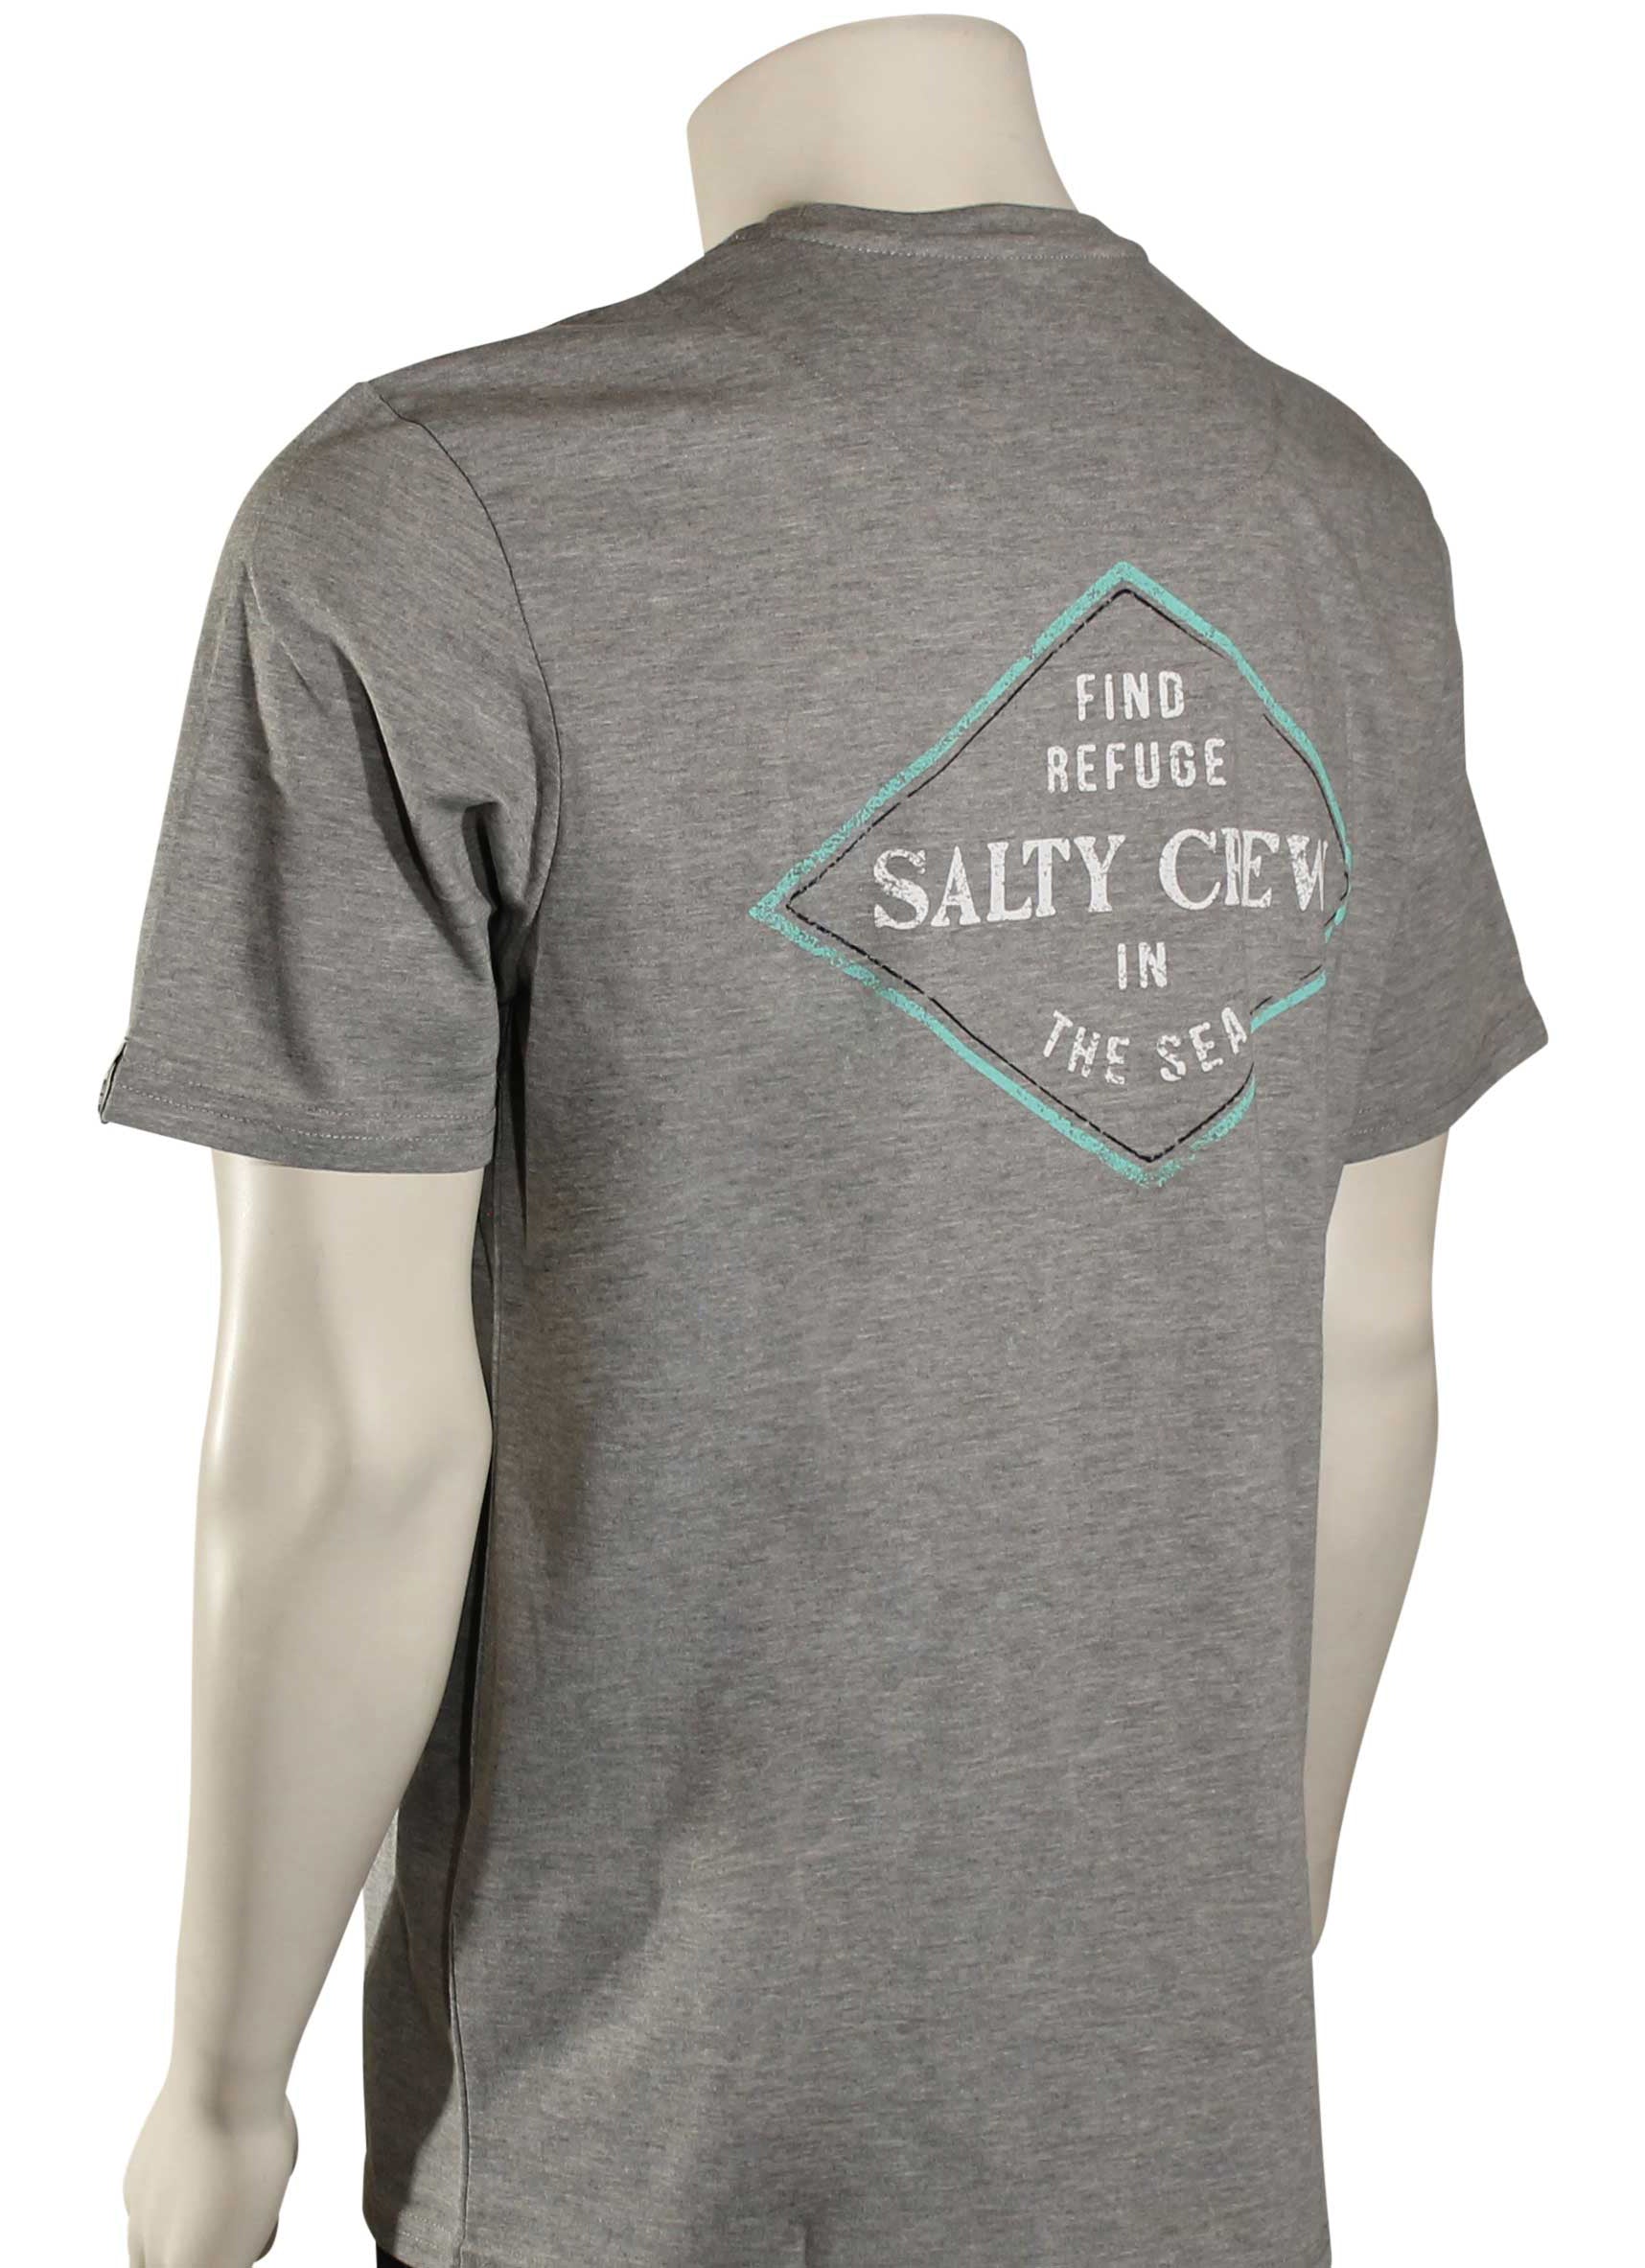 Salty Crew Four Corners SS Tech Tee AthleticHeather S